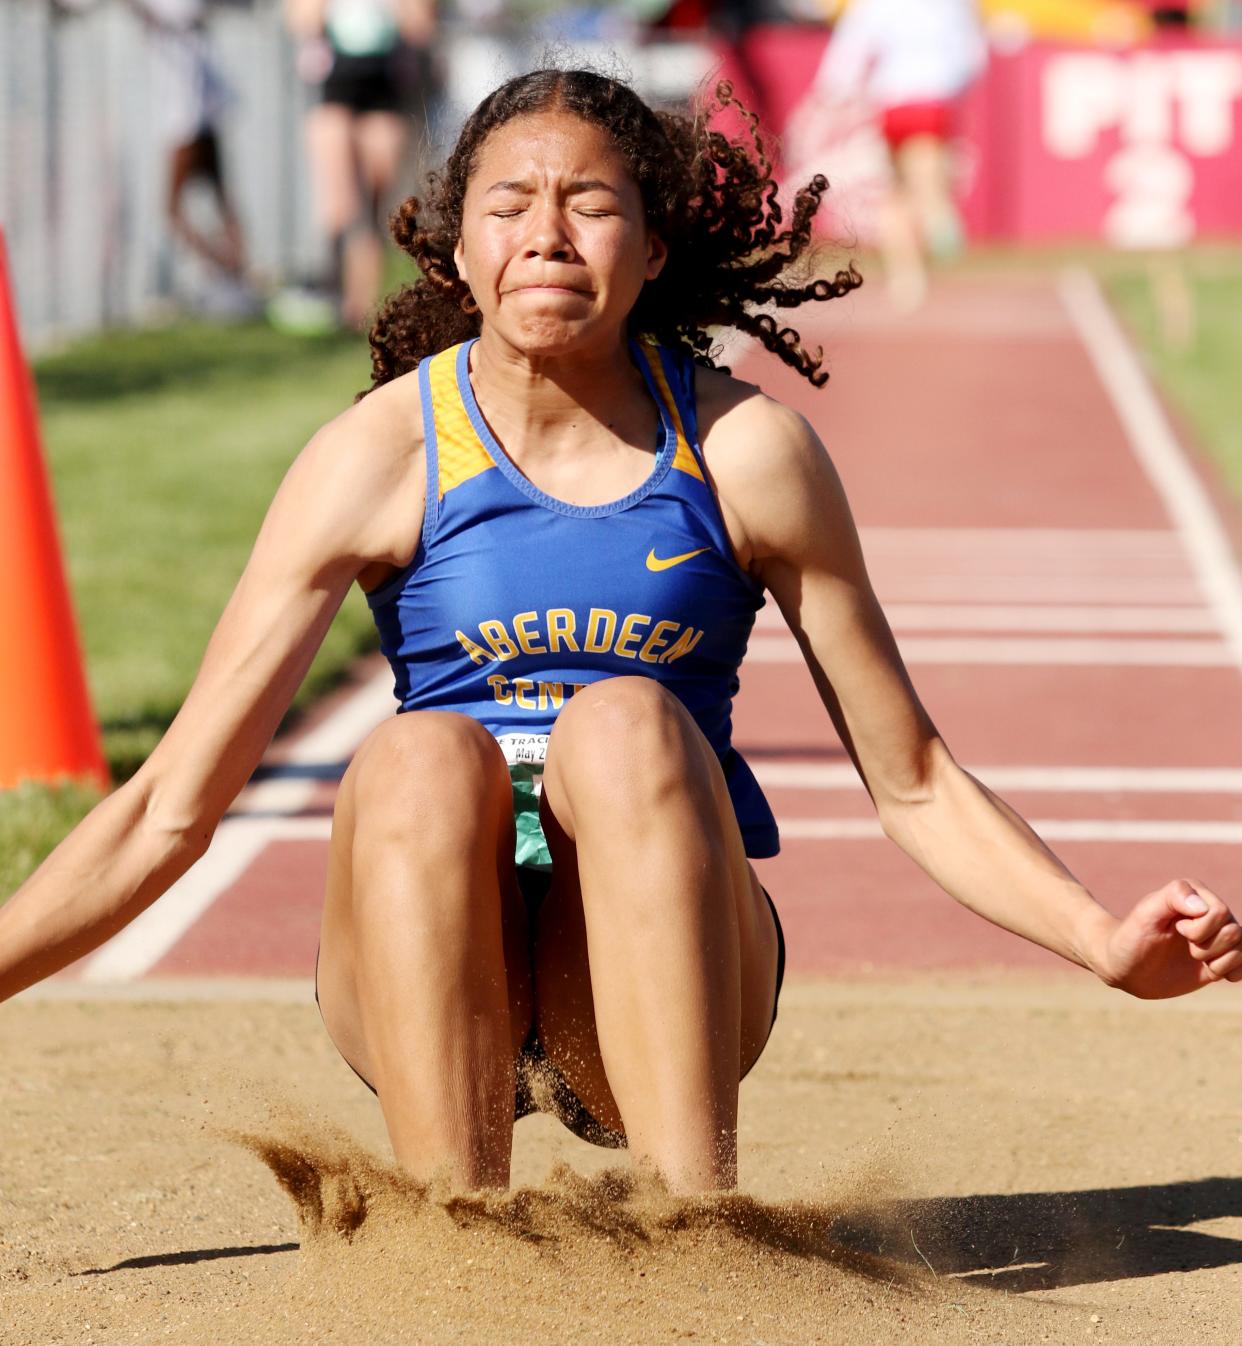 Aberdeen Central's Ciara Frank hits the landing pit in the Class AA girls' long jump during the 2022 South Dakota State Track and Field Championships at Sioux Falls.